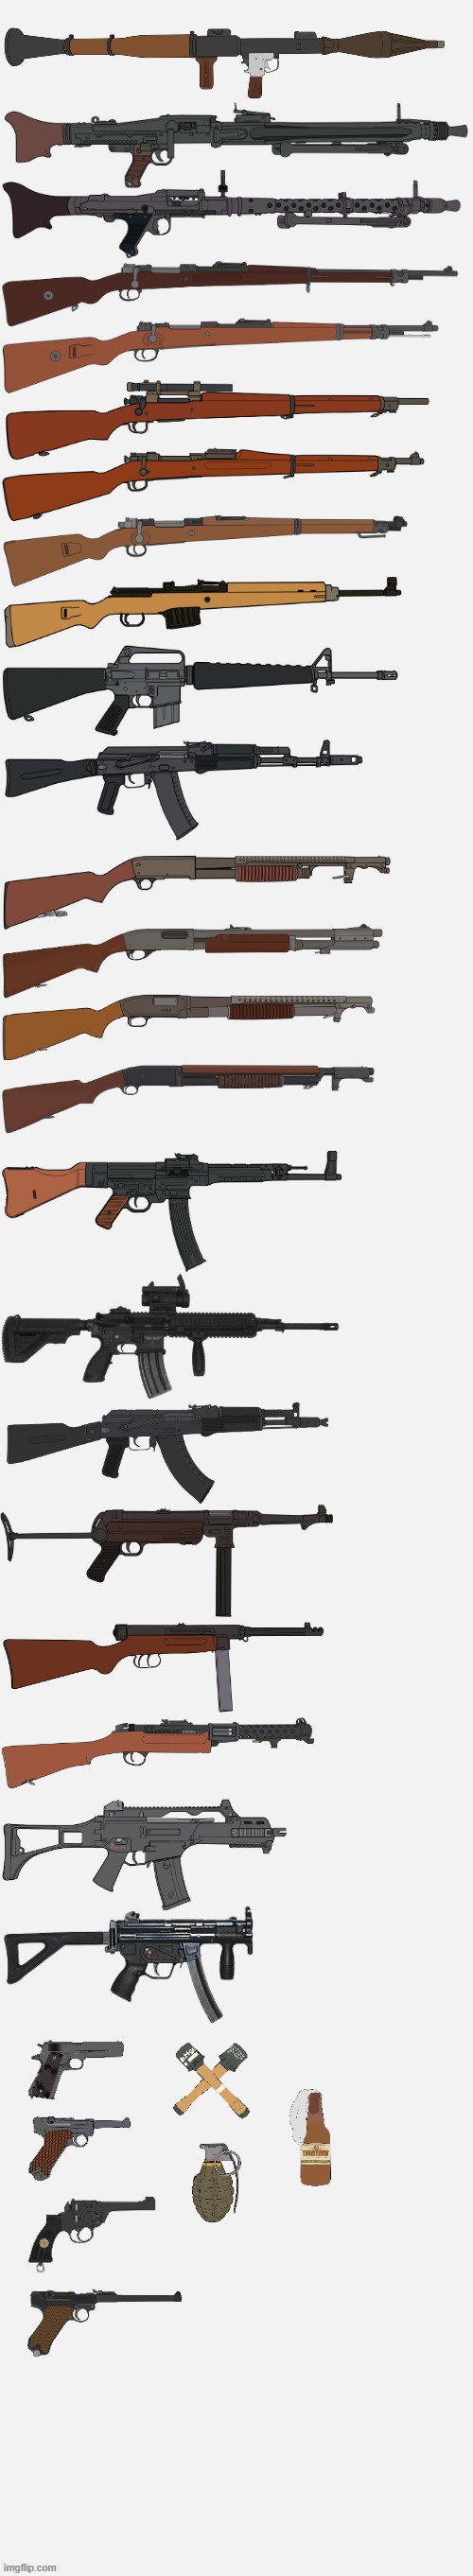 All Weapons of the Anti-Fandom Front/Fascist Coalition | image tagged in large white blank background,anti-fandom,anti-furry,war,wwiv,military | made w/ Imgflip meme maker